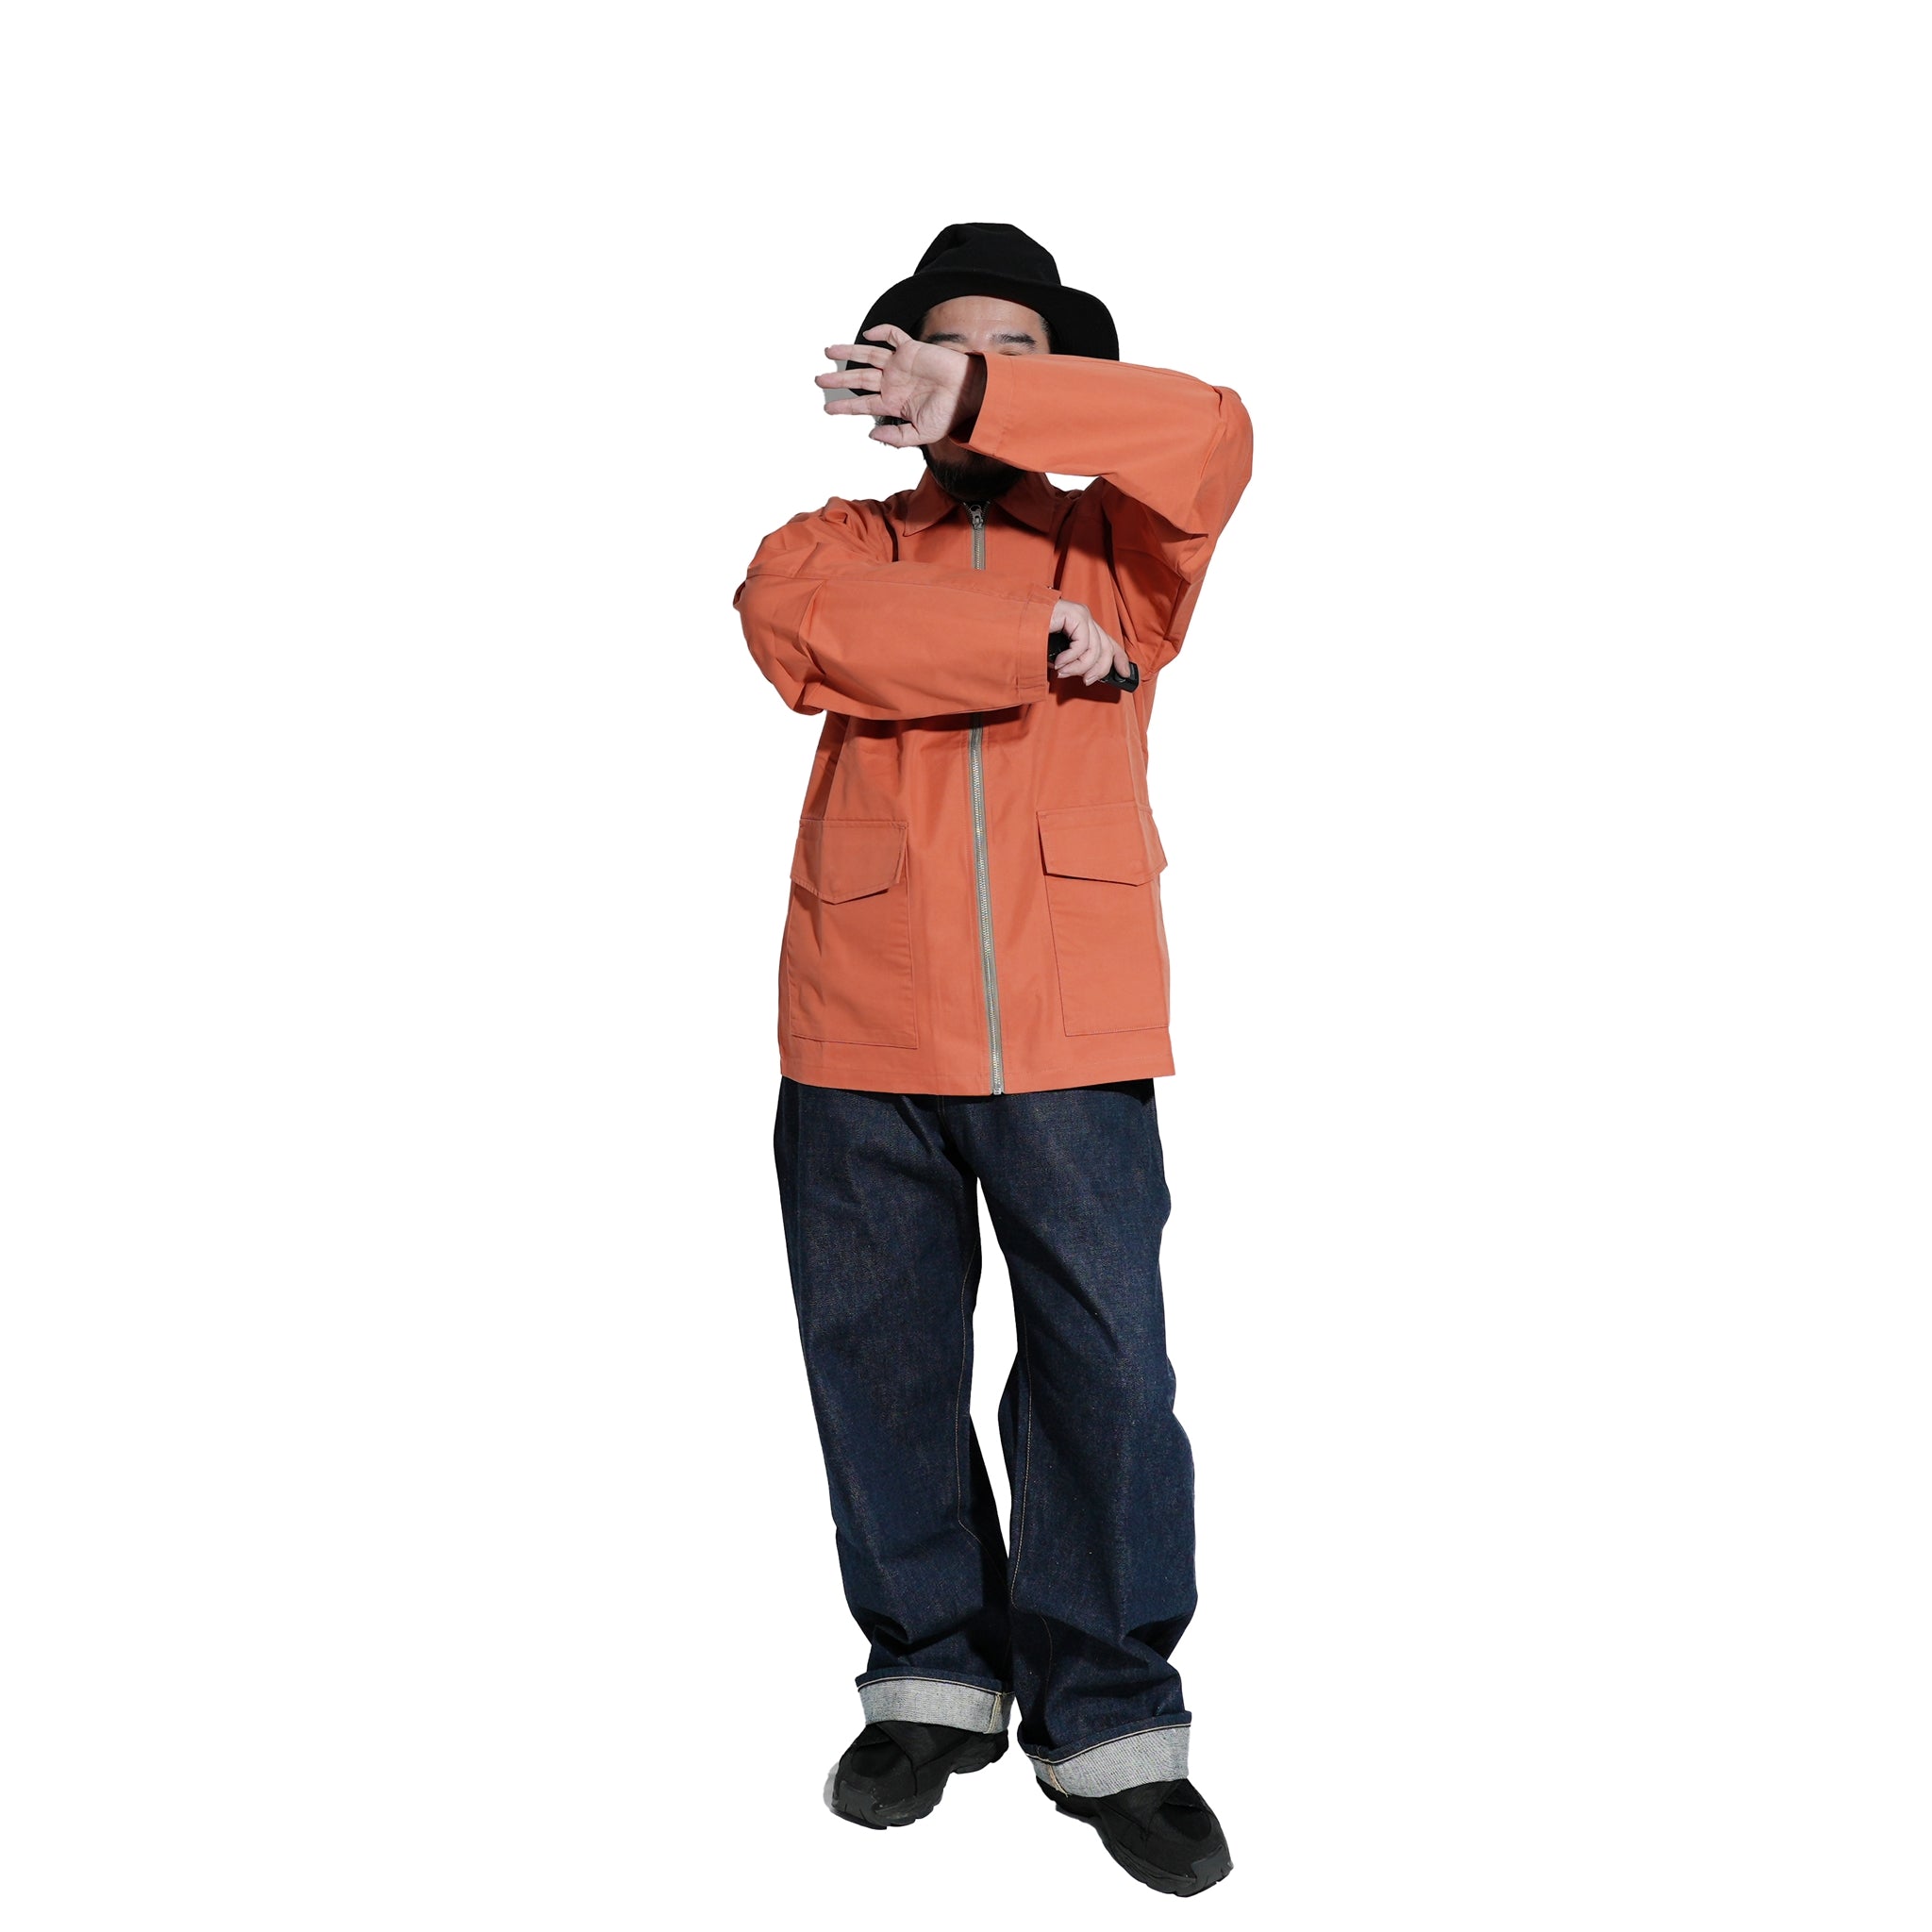 Name:SS23-PILOT JACKET | Color:CORAL | Size:M【WORKWARE】